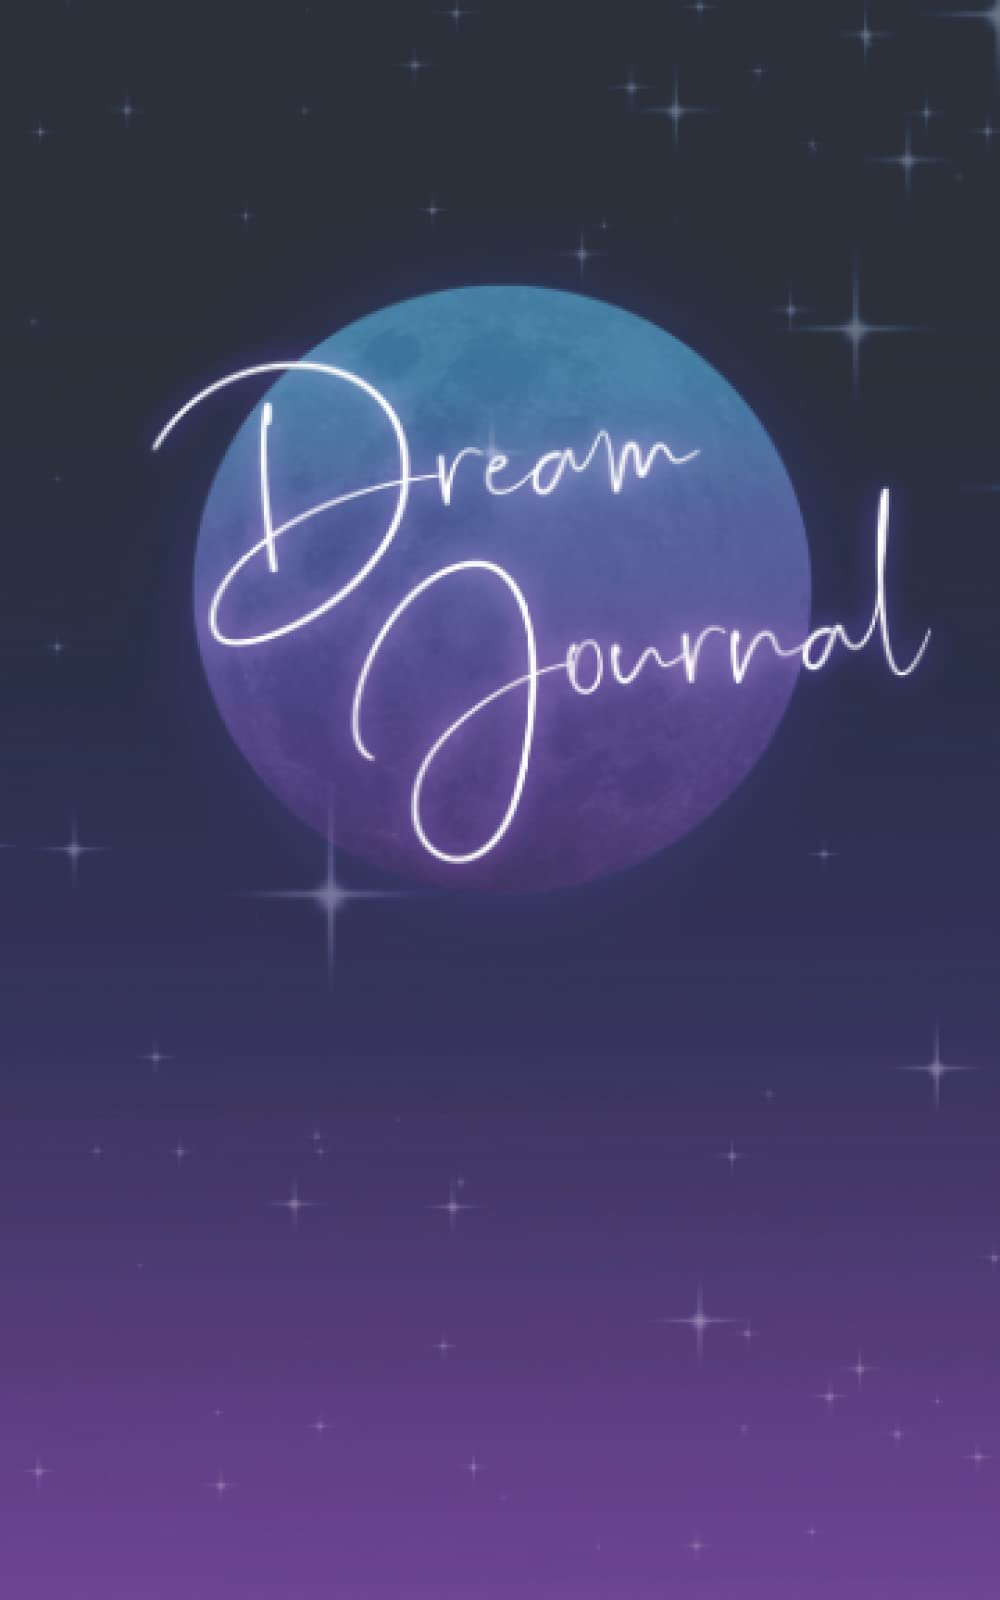 A dream journal or a pen and paper.